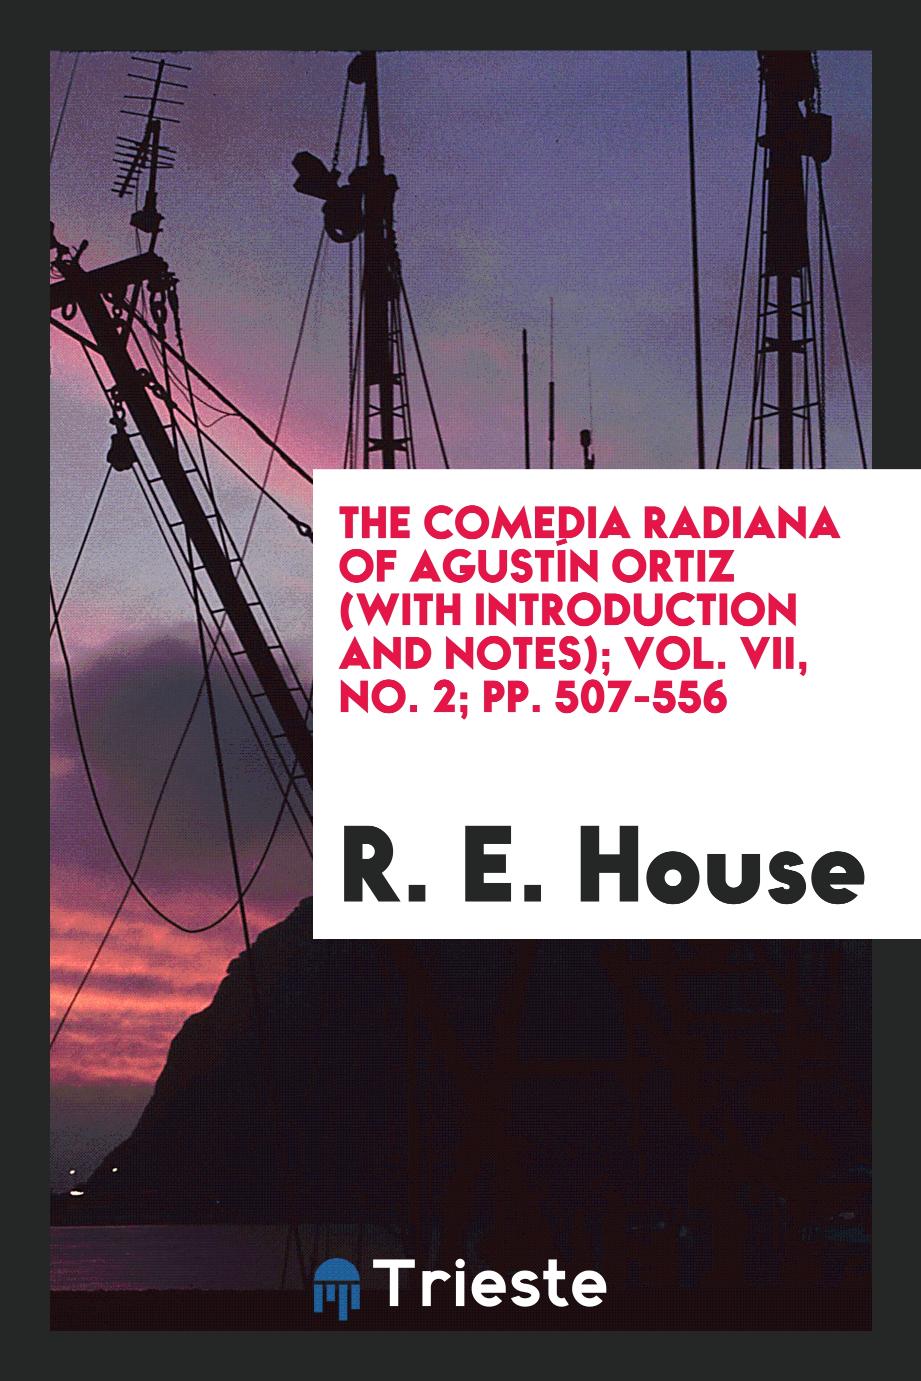 The Comedia Radiana of Agustín Ortiz (with Introduction and Notes); Vol. VII, No. 2; pp. 507-556